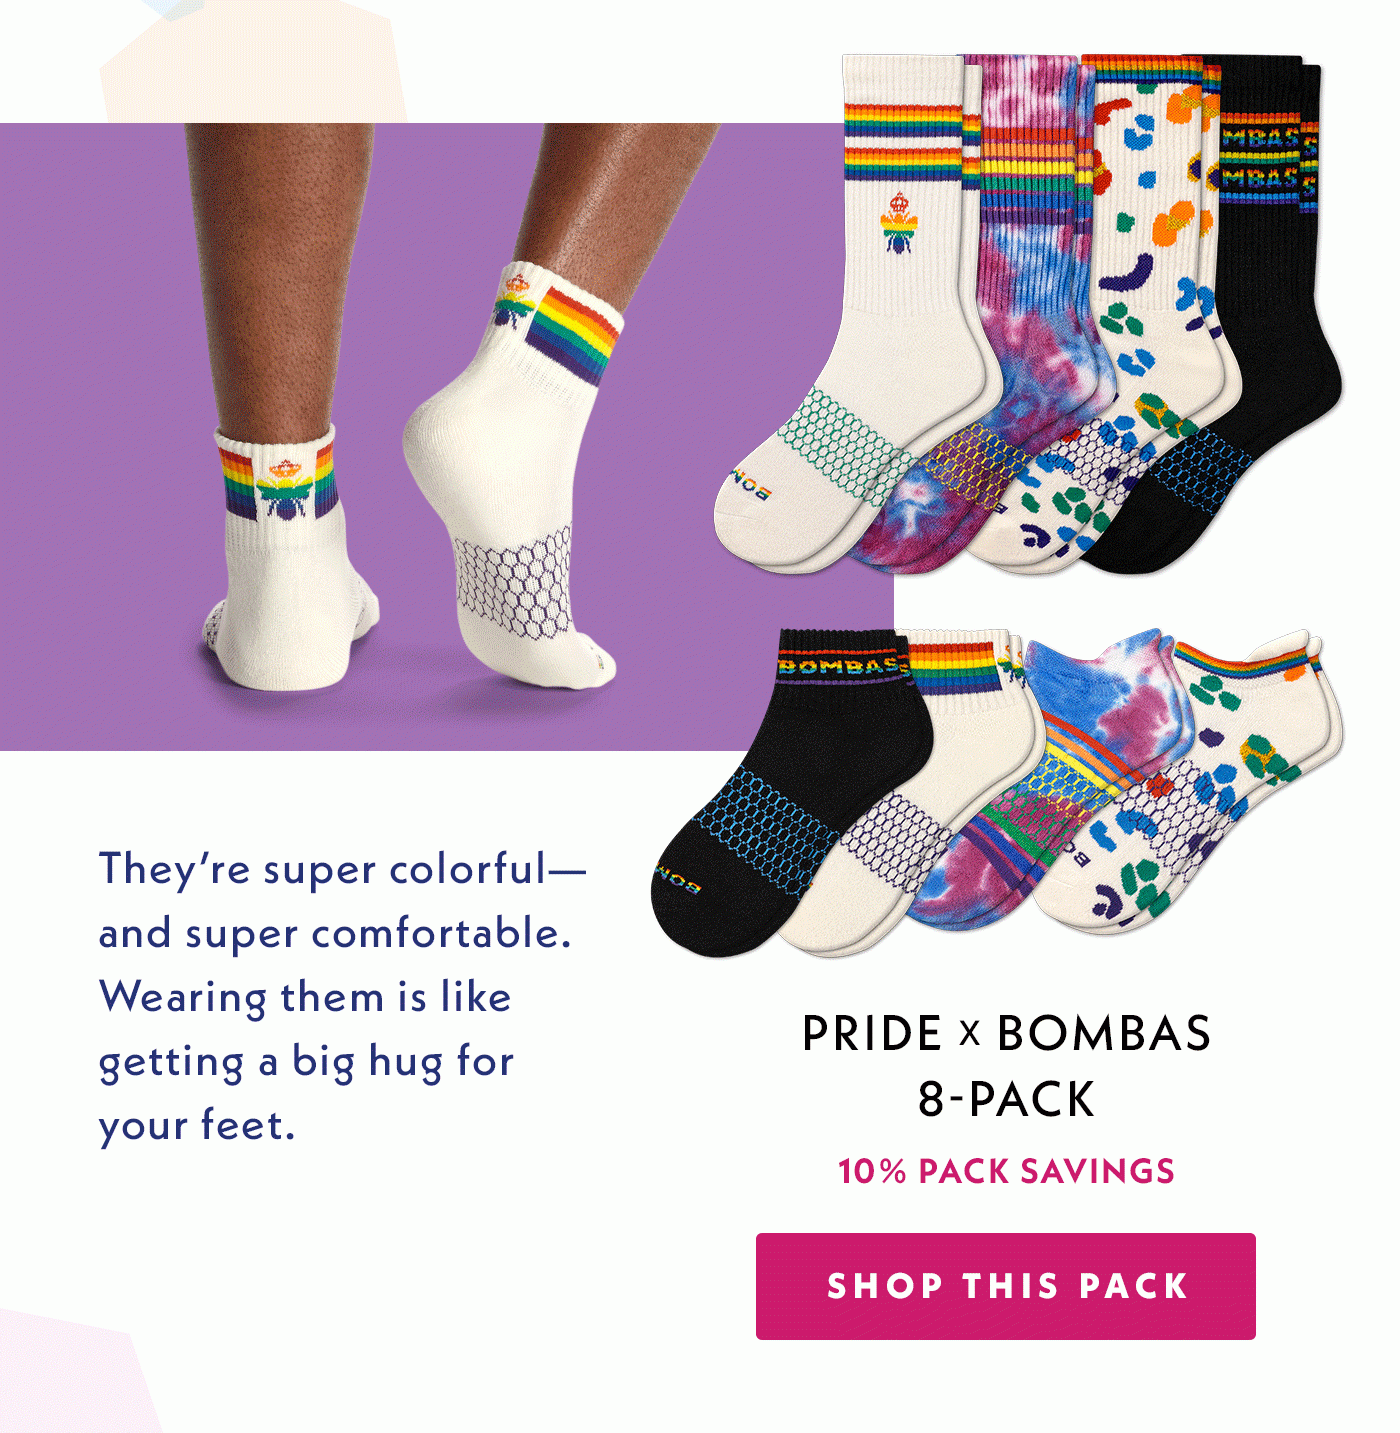 They're super colorful - and super comfortable. Wearing them is like getting a big hug for your feet. | Pride x Bombas 8-Pack | 10% Pack Savings | Shop This Pack